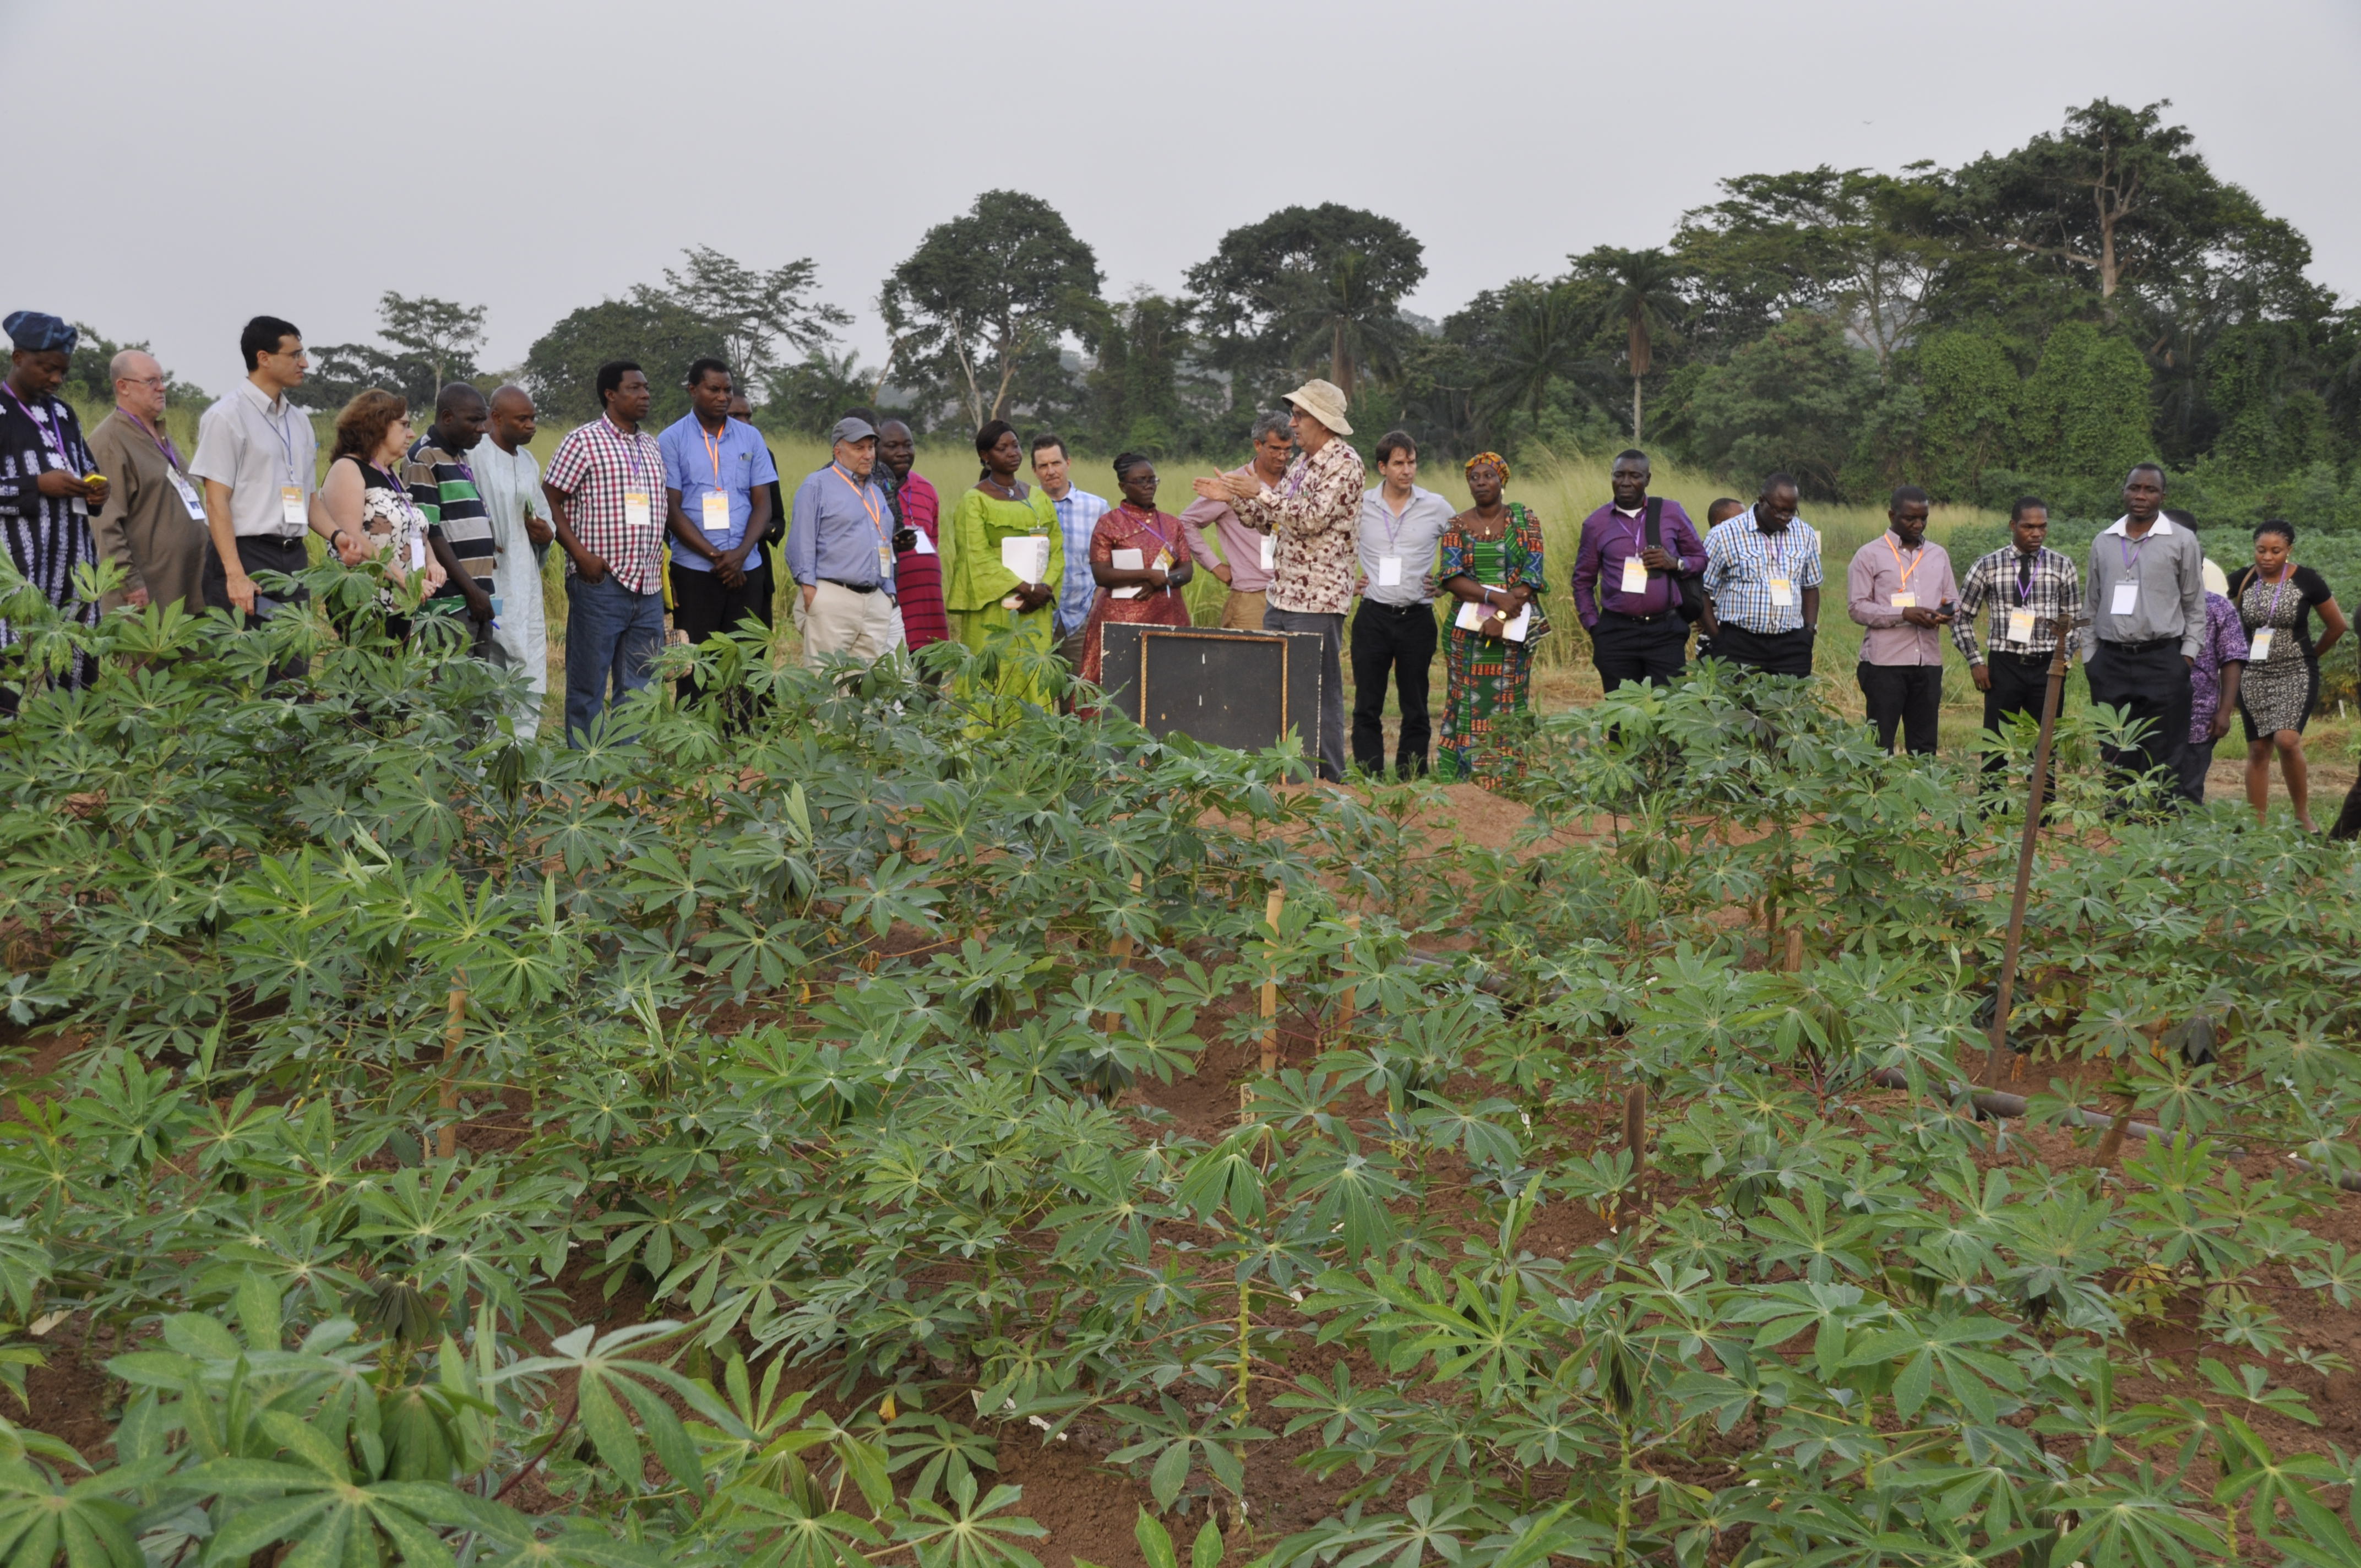 Dr Peter Kulakow (in front, wearing a hat) talks about the field operations and breeding procedures for the cassava seed system.